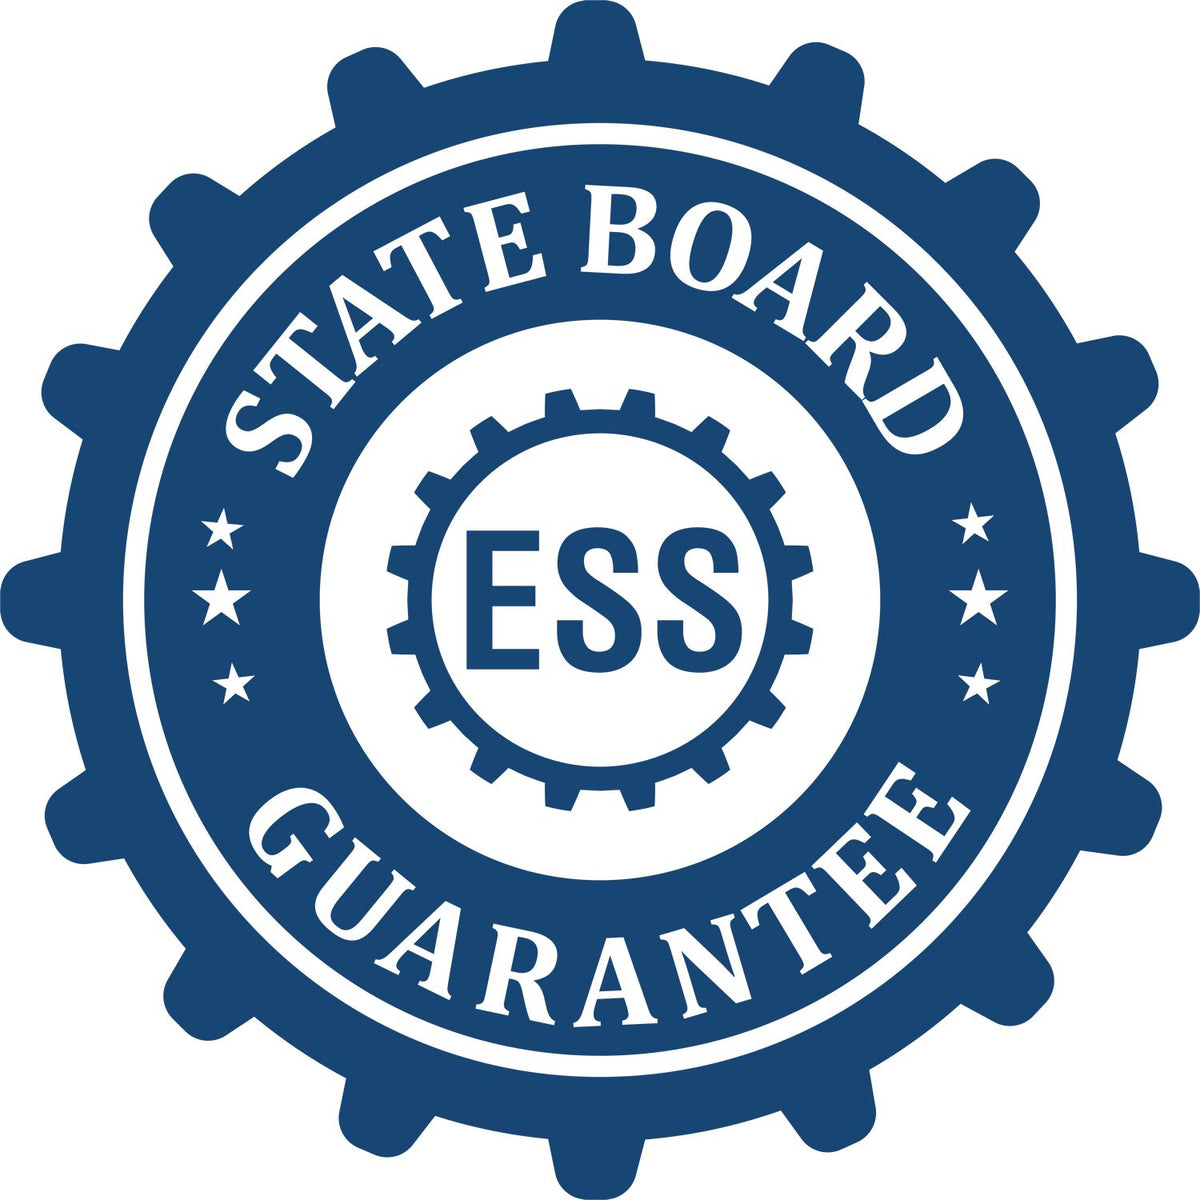 An emblem in a gear shape illustrating a state board guarantee for the Gift New Jersey Architect Seal